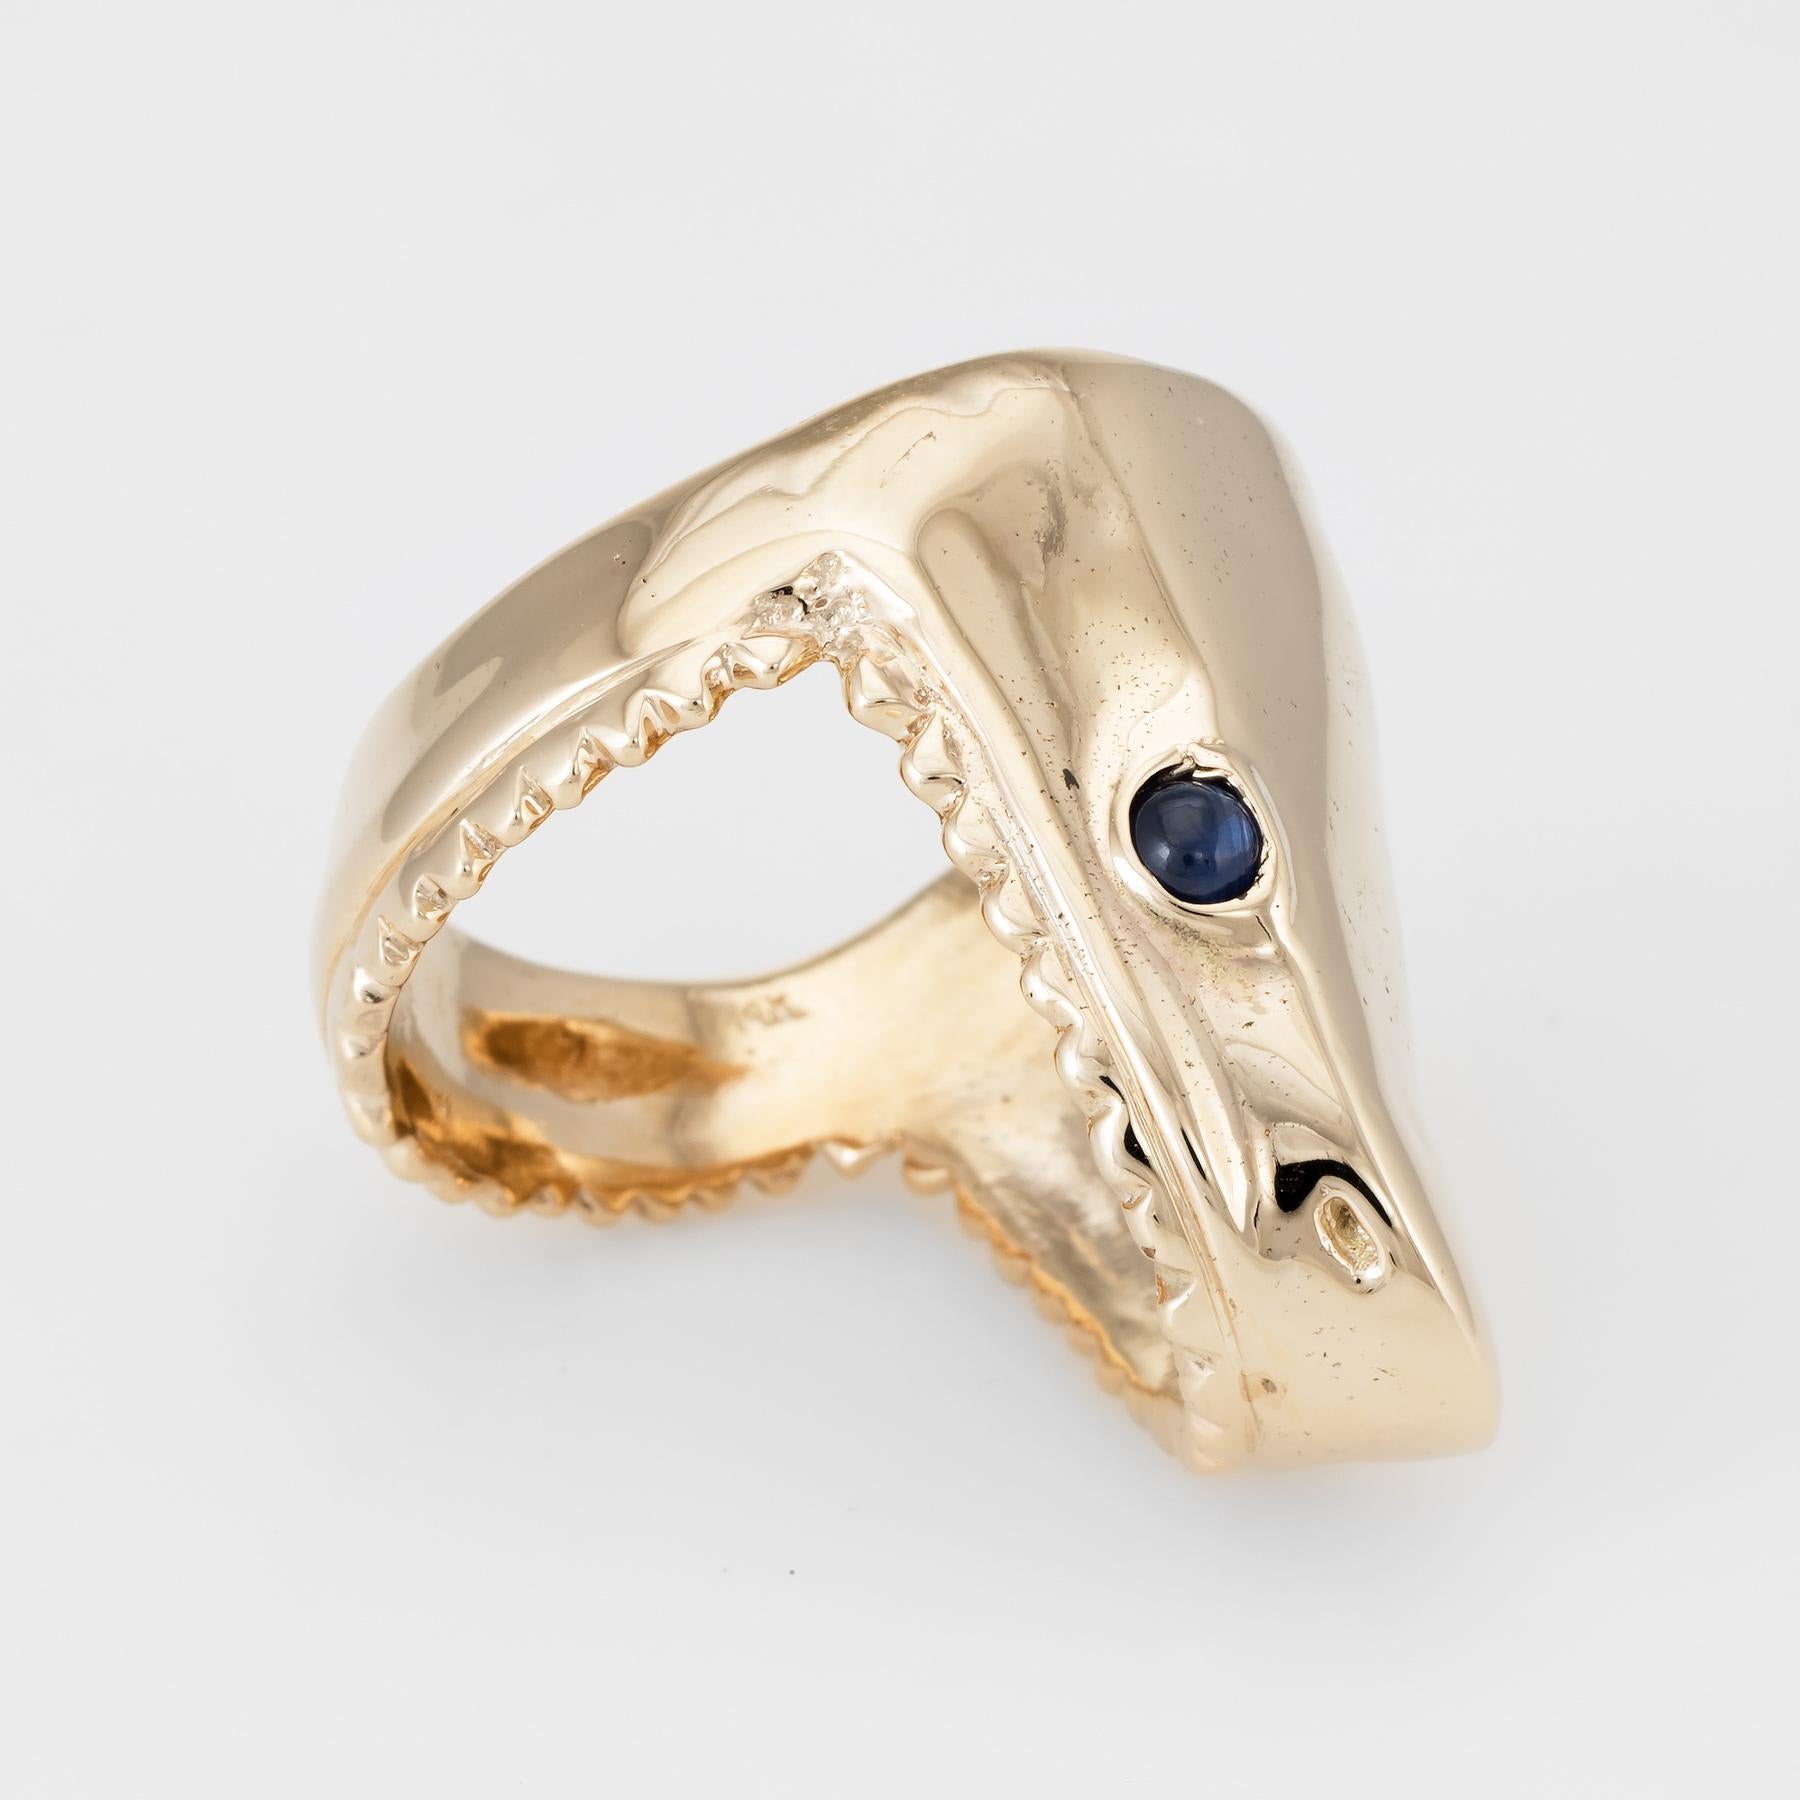 Distinct and unusual shark head ring, crafted in 14 karat yellow gold. 

Two x 3mm cabochon cut blue sapphires are set into the eyes (note: slight chip to one sapphire - visible under a 10x loupe).   

The ring is in very good condition.